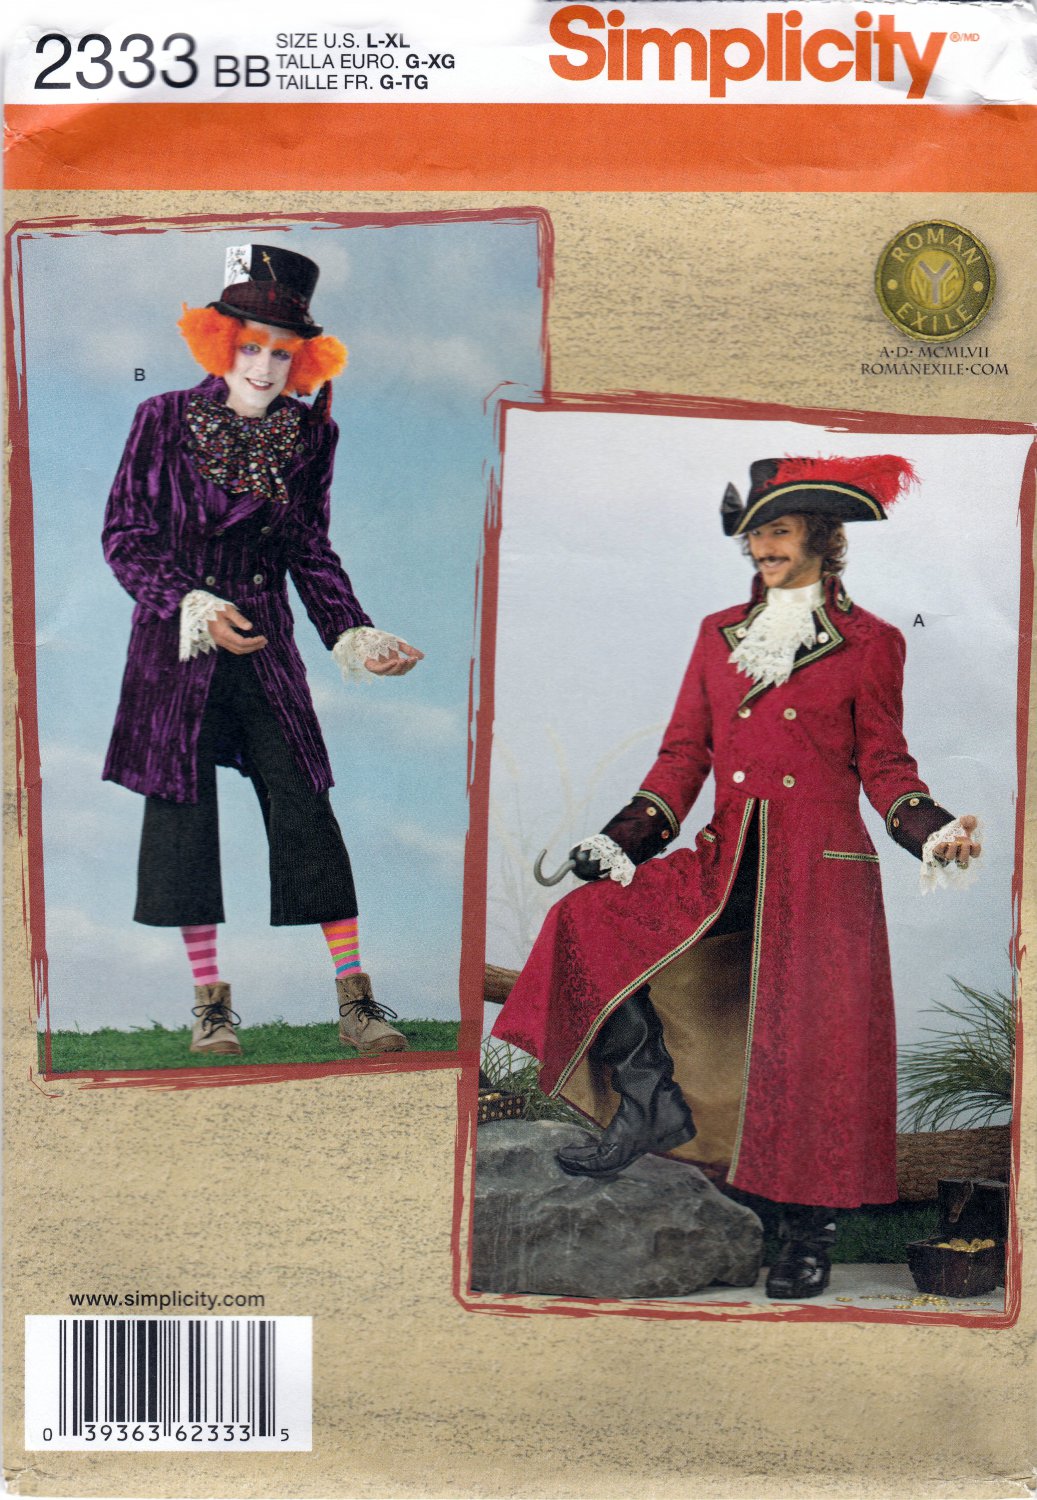 Simplicity 2333 Mens Costumes MadHatter Captain Hook Sewing Pattern Sizes L-XL